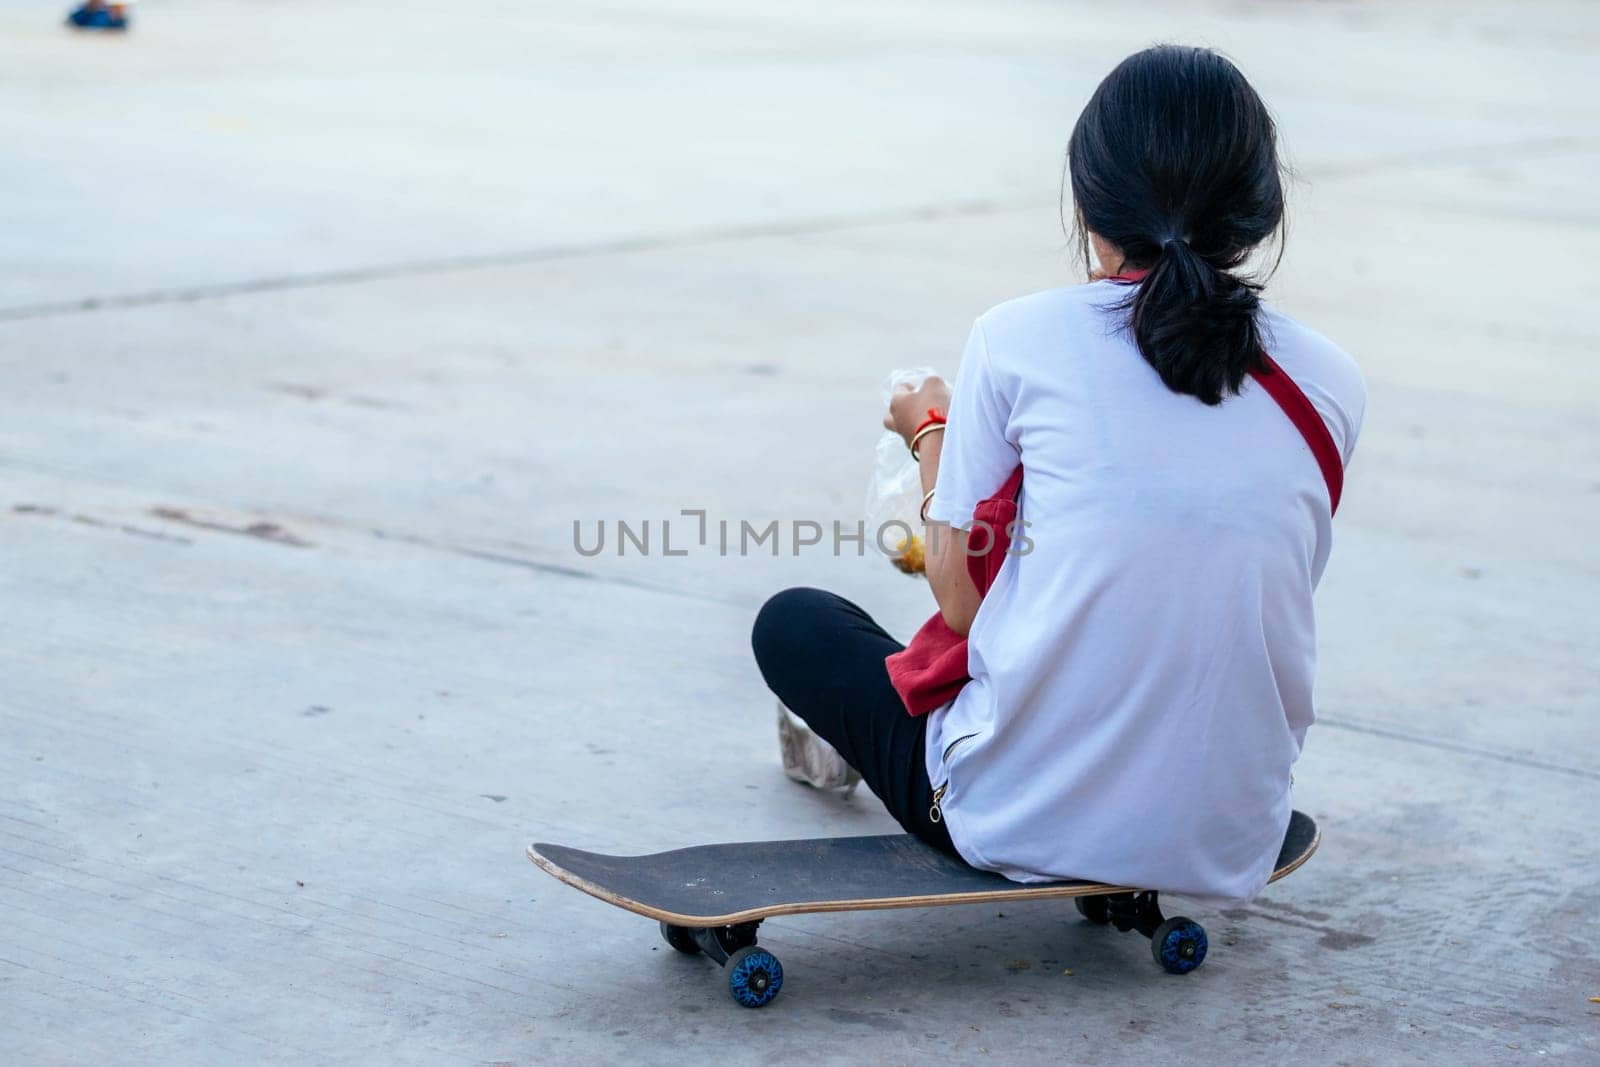 Girl sitting on her back on a skateboard in the city. Outdoors, lifestyle